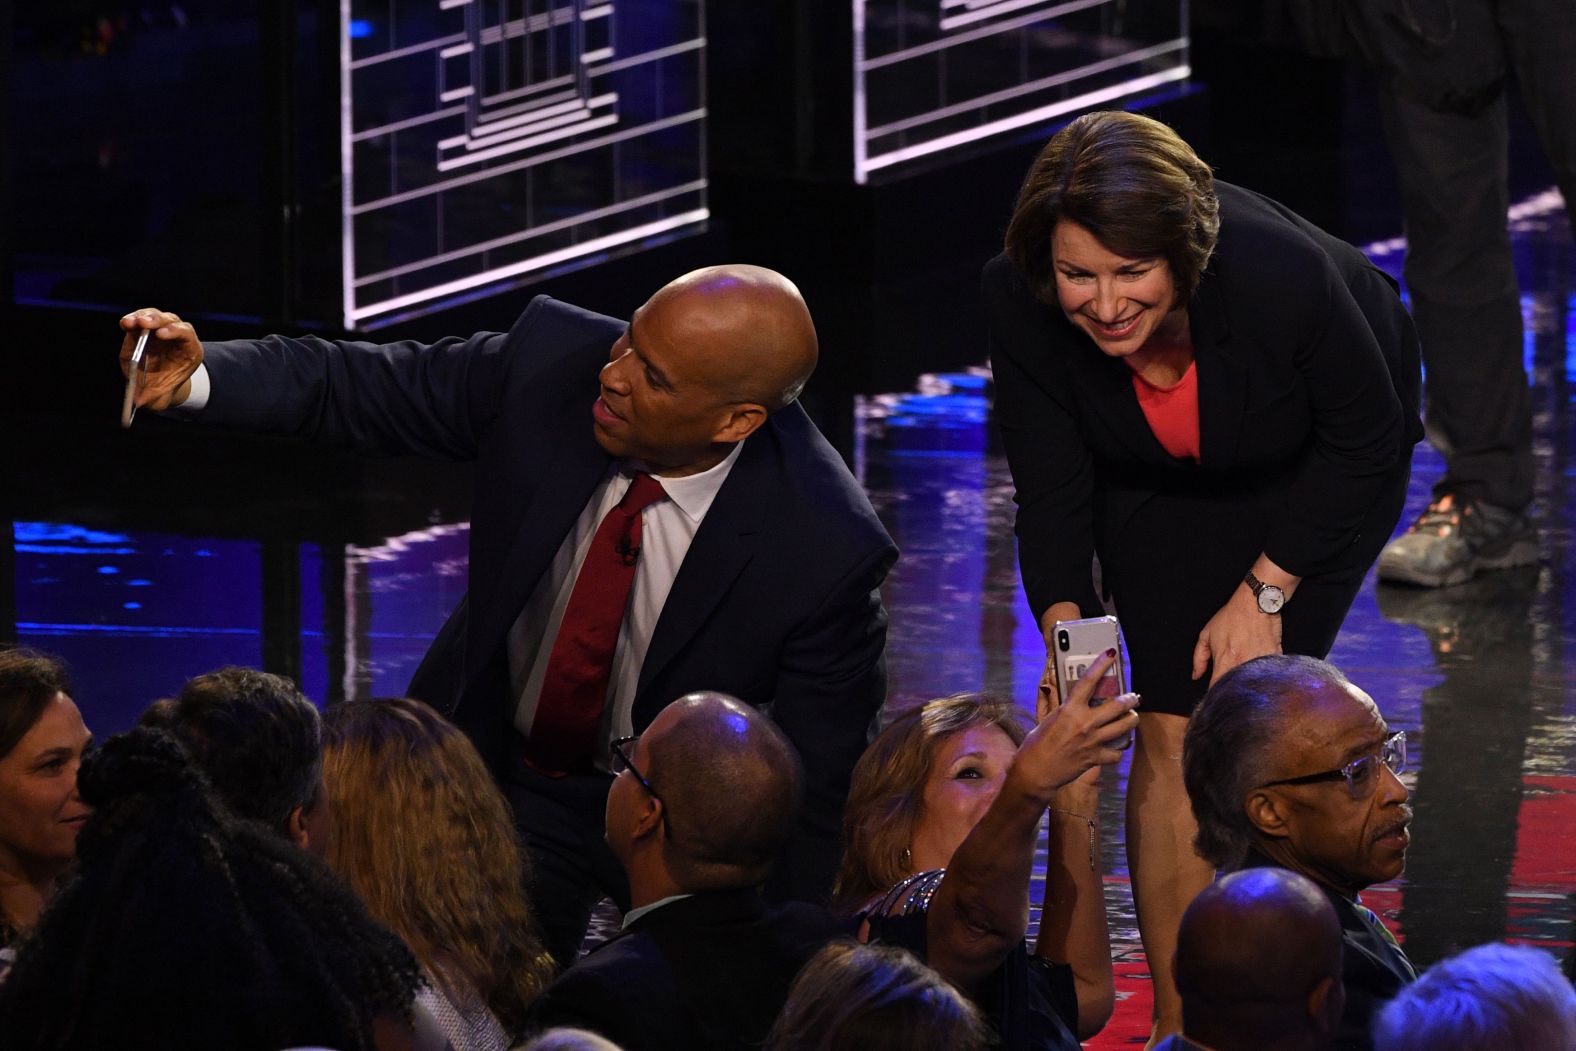 Booker and Klobuchar take selfies with supporters after Wednesday's debate.